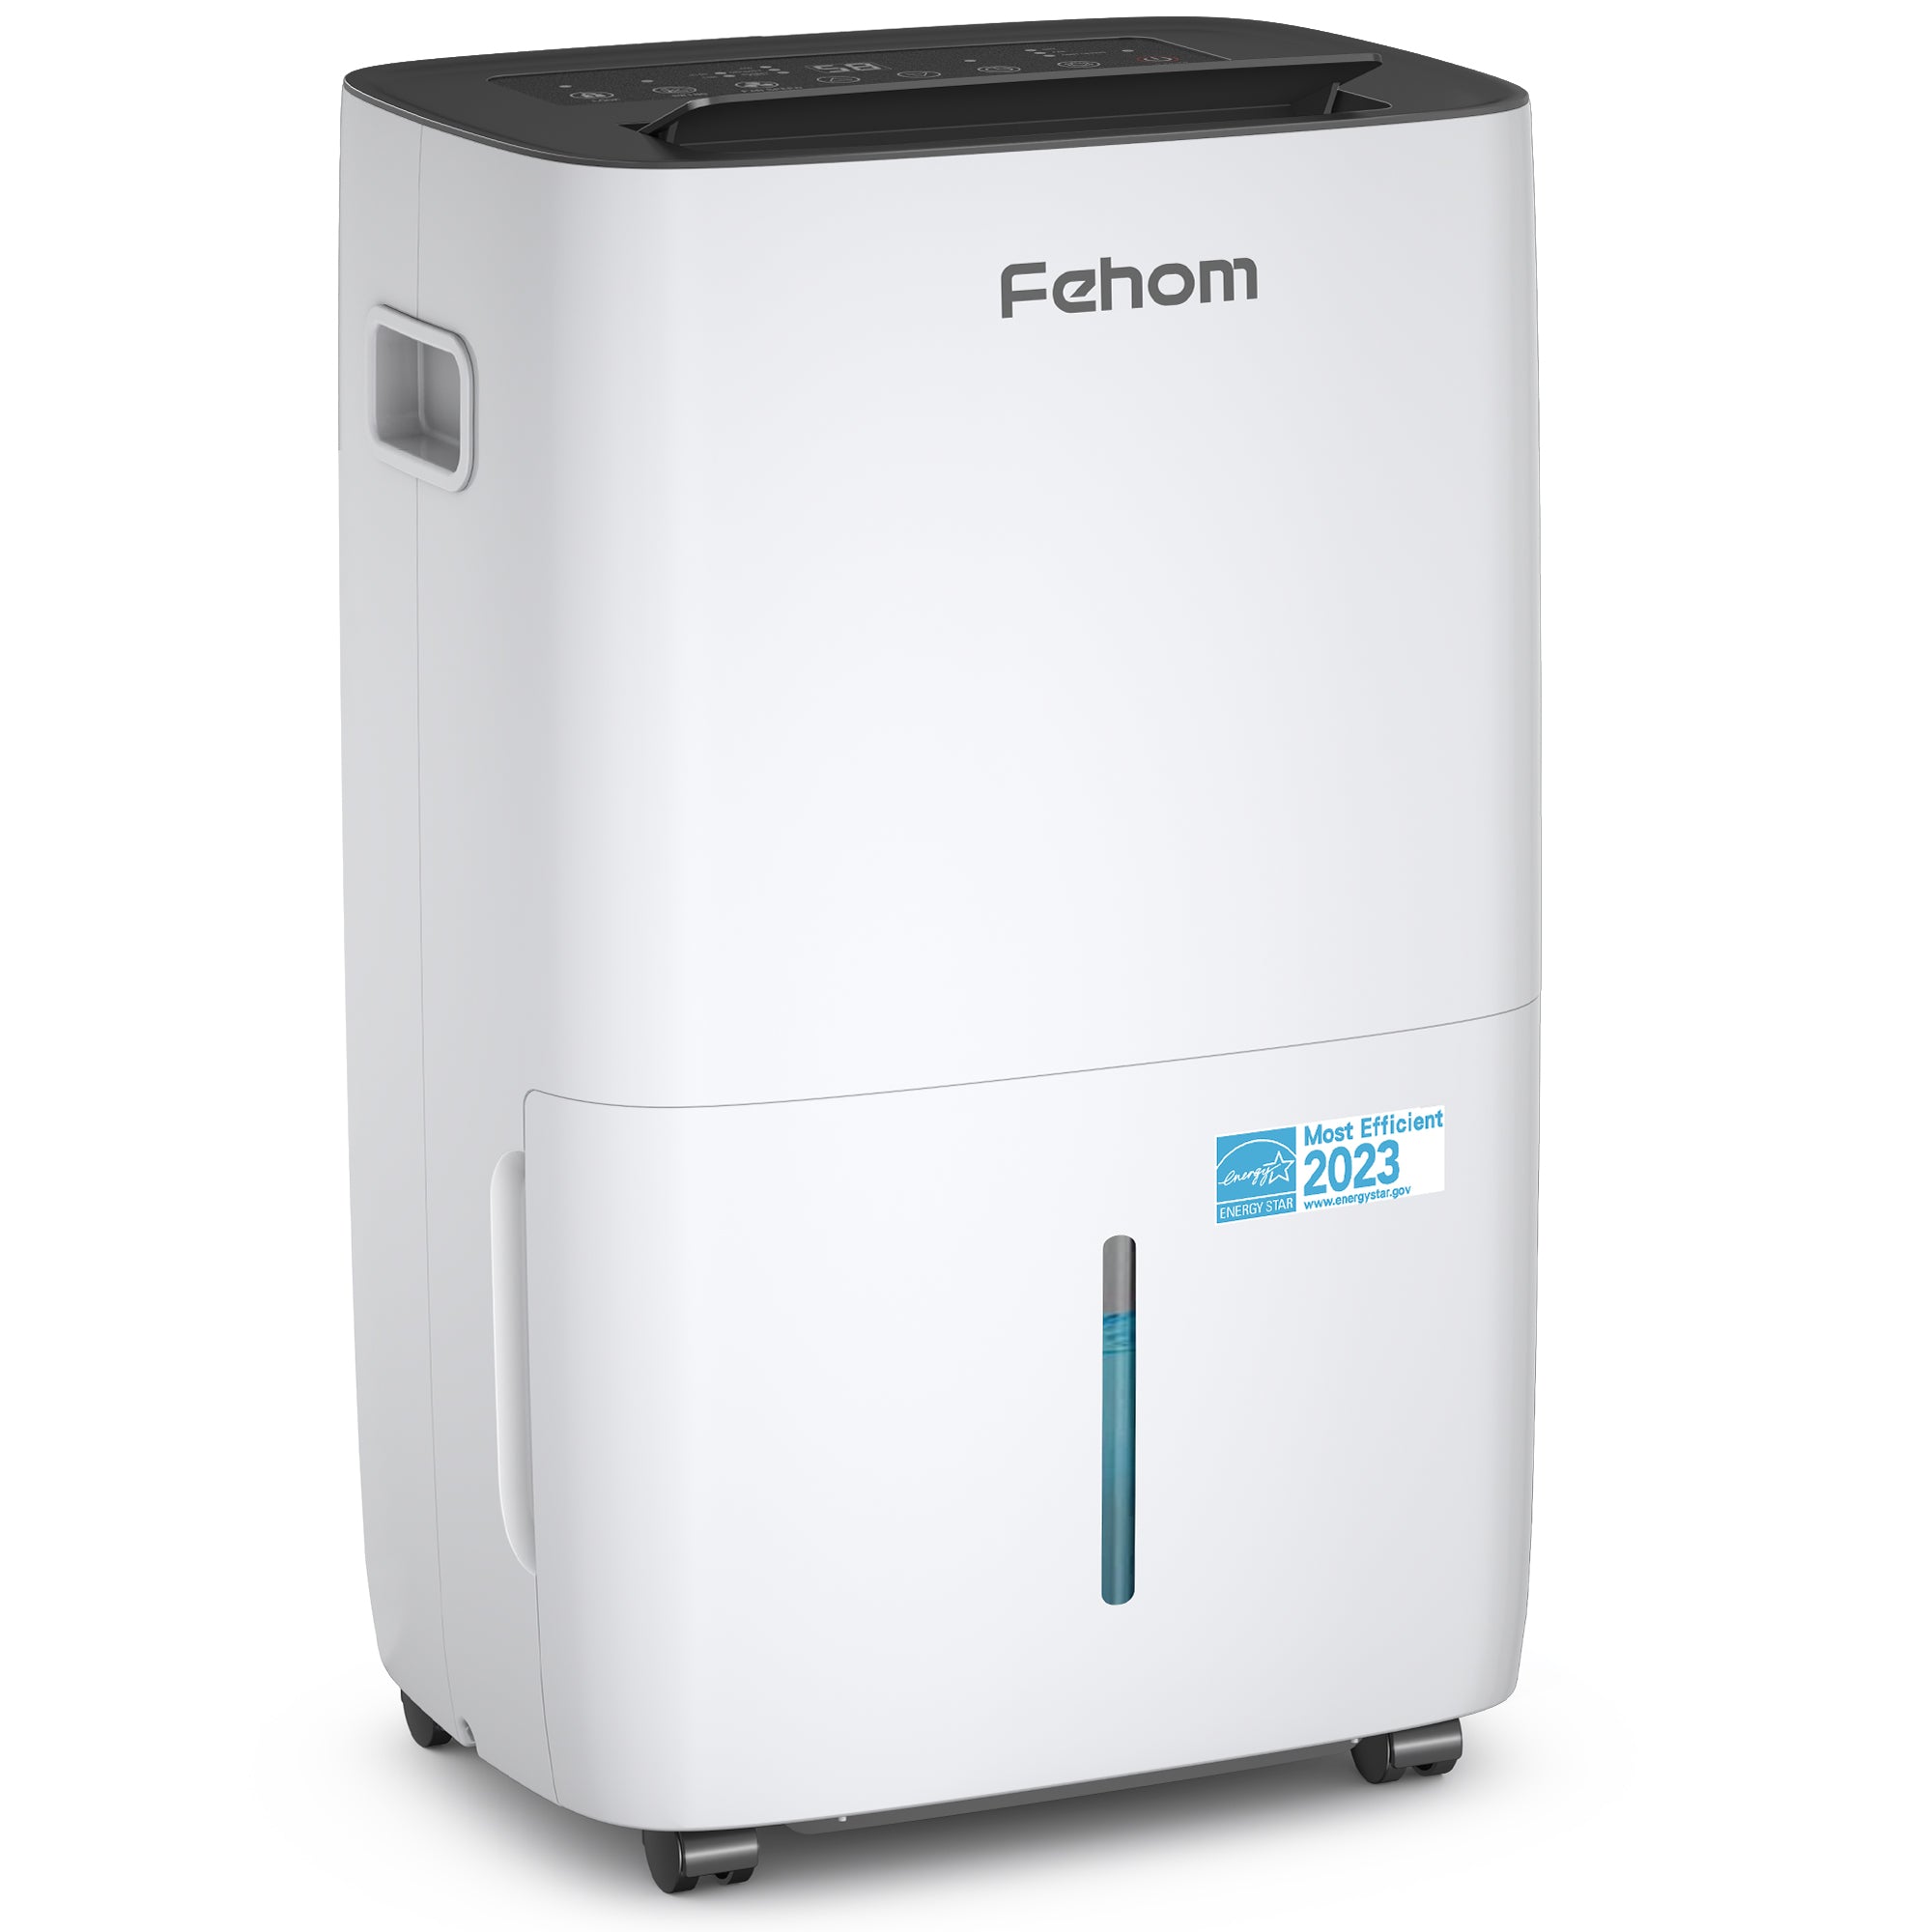 Fehom 150 Pints Dehumidifier Most Efficient 2023 Energy Star - 7000 Sq. Ft Dehumidifier for Basement with Drain Hose and 2.12 Gal Water Tank, Smart Dehumidifiers for Home, Large Room(Model: JD026L-150)